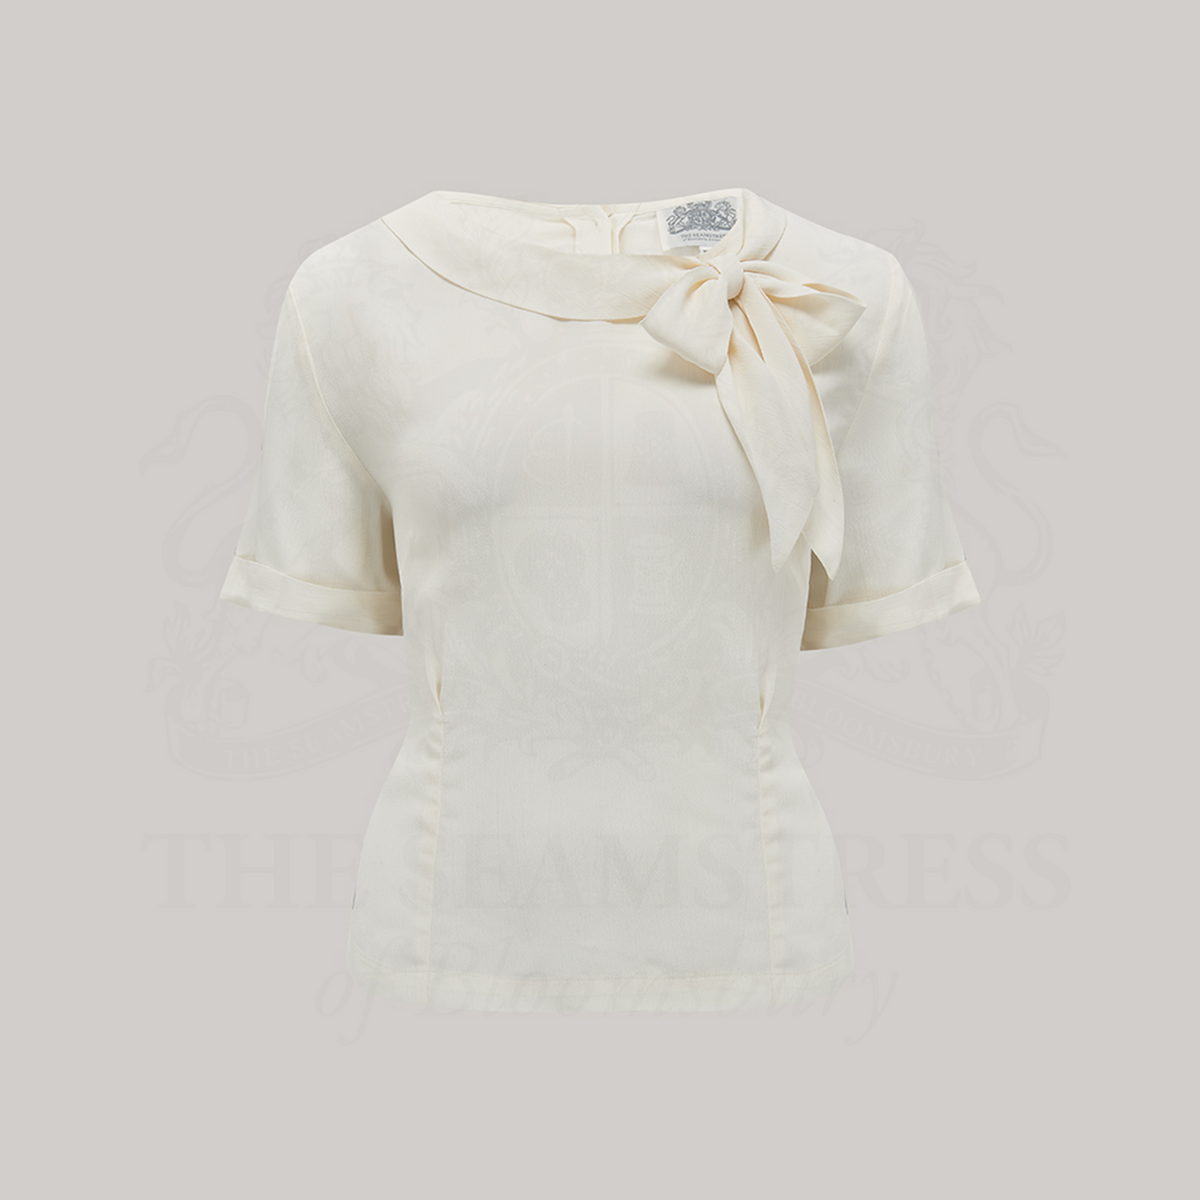 A 1940s style short sleeve cream blouse. Featuring a side tie-neck collar and button fastenings down the back of the blouse.